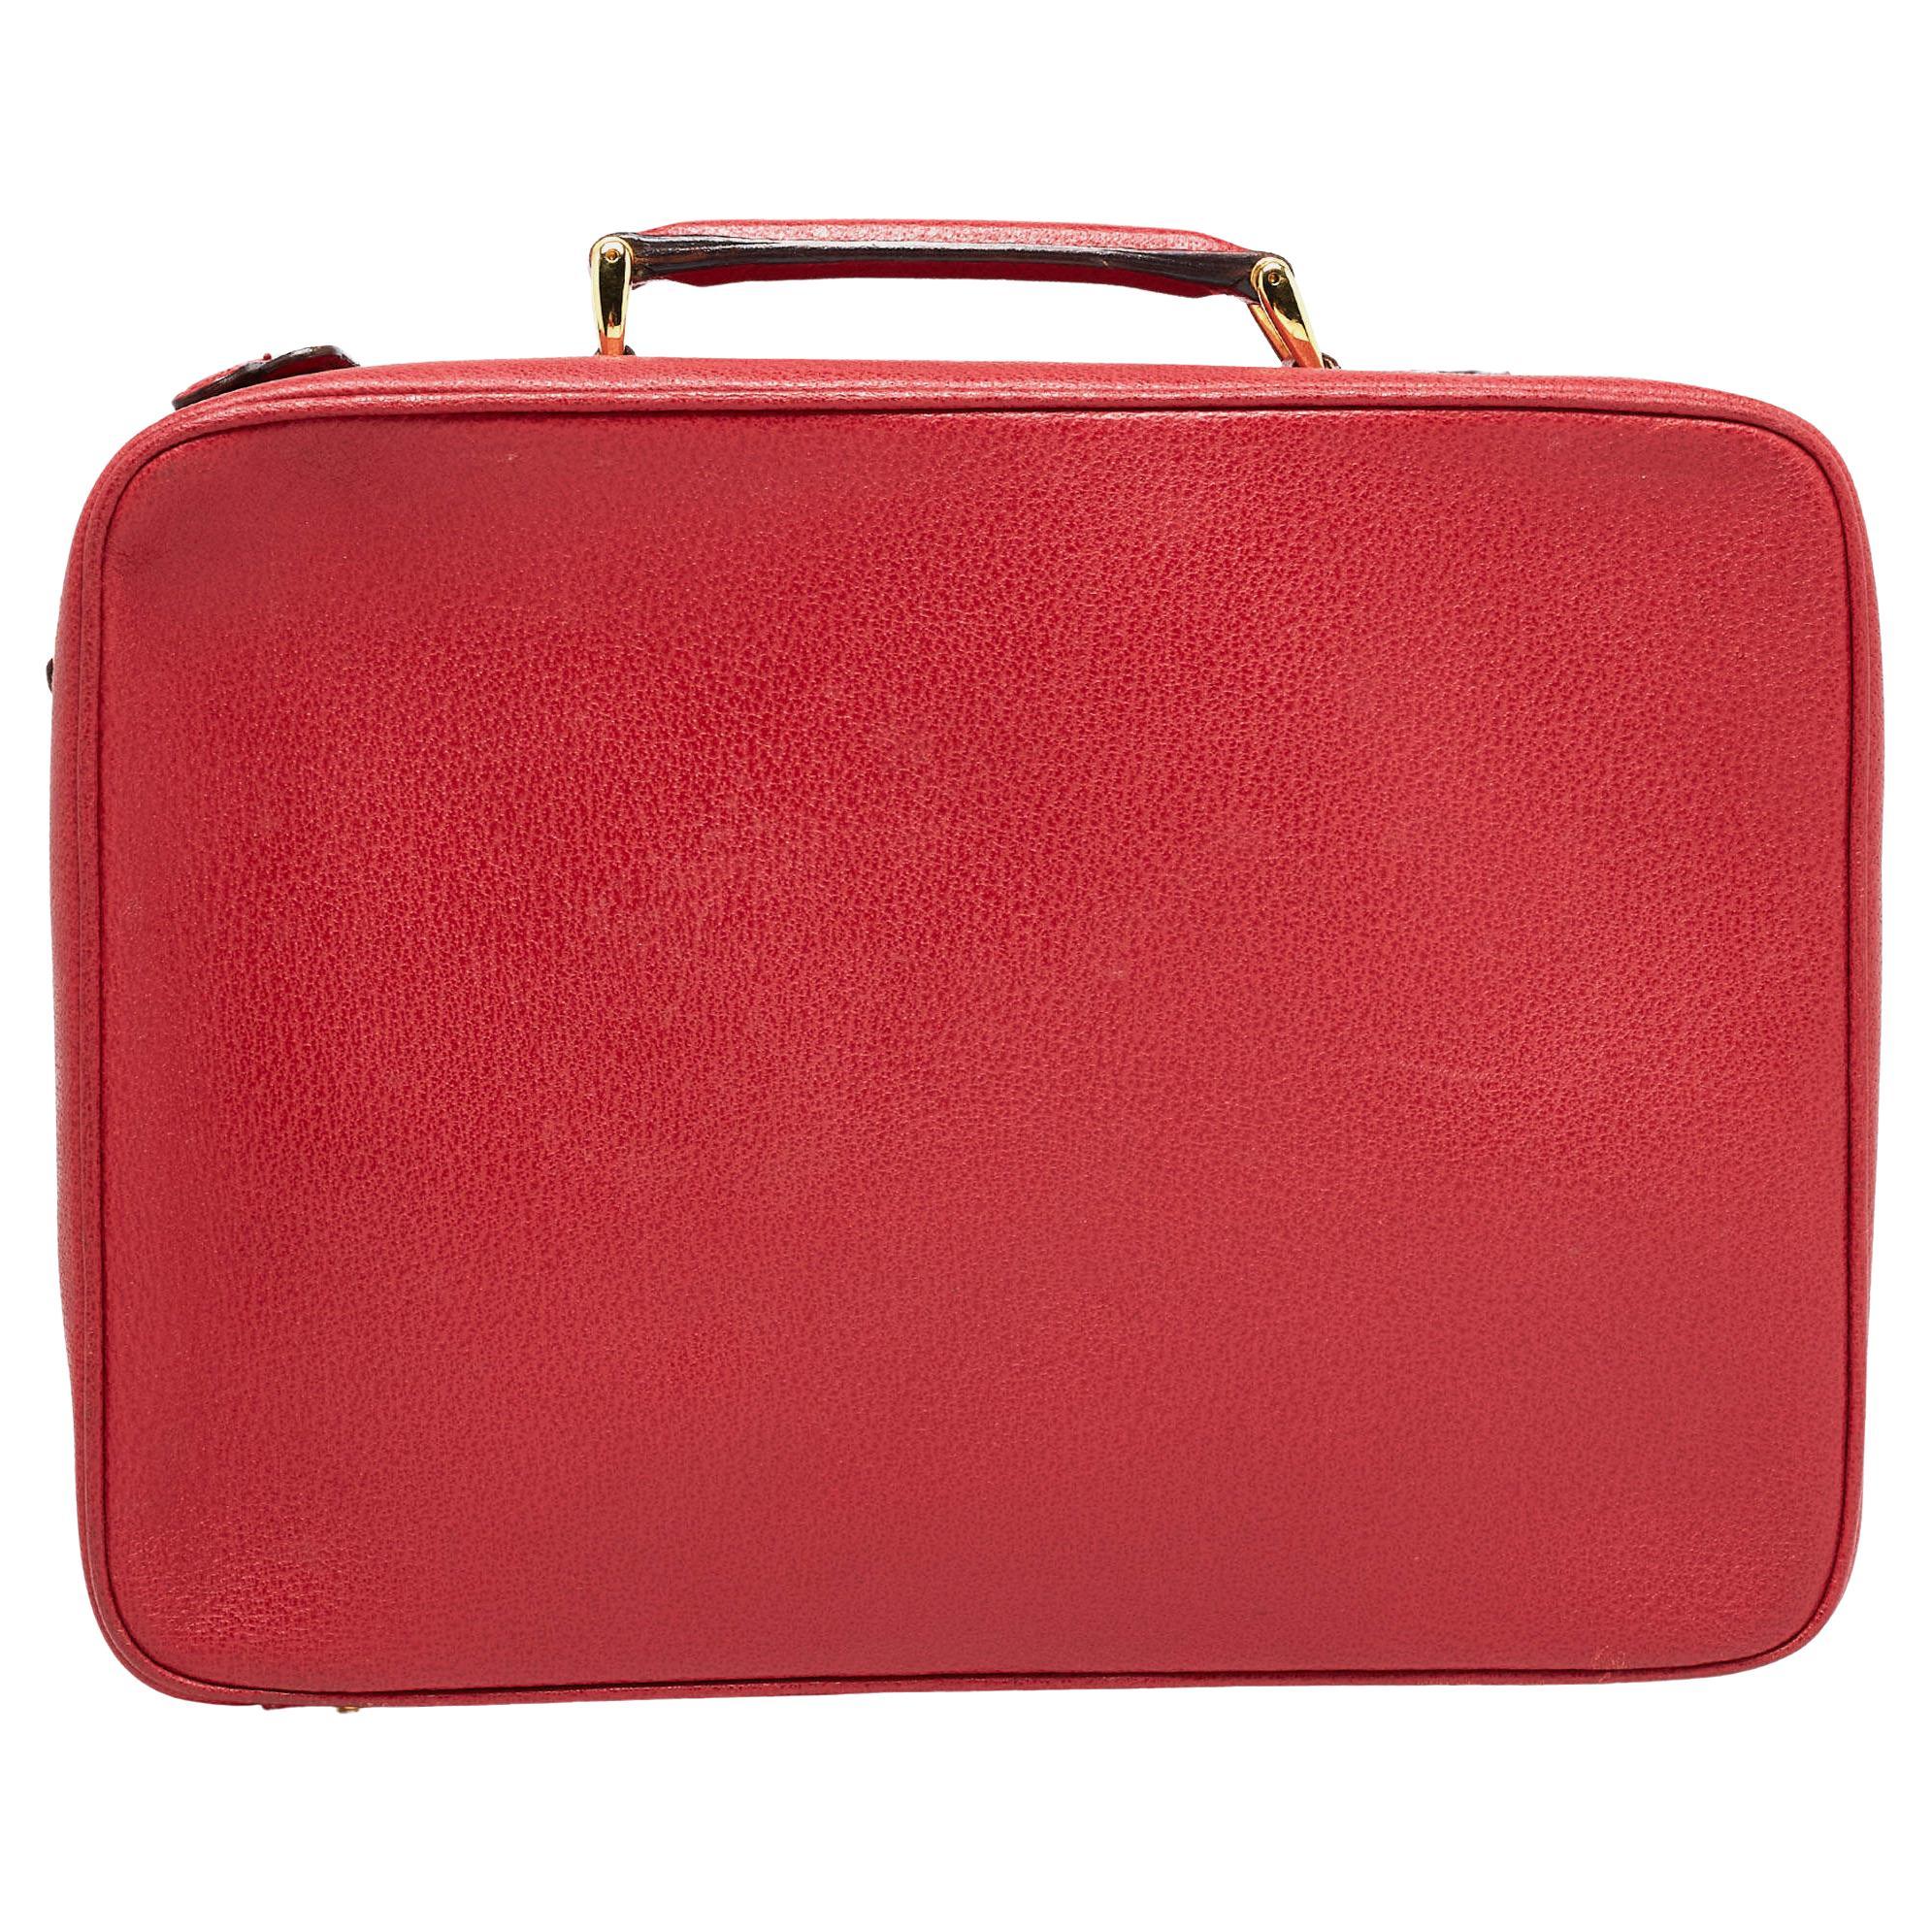 Gucci Red Leather Briefcase Bag For Sale